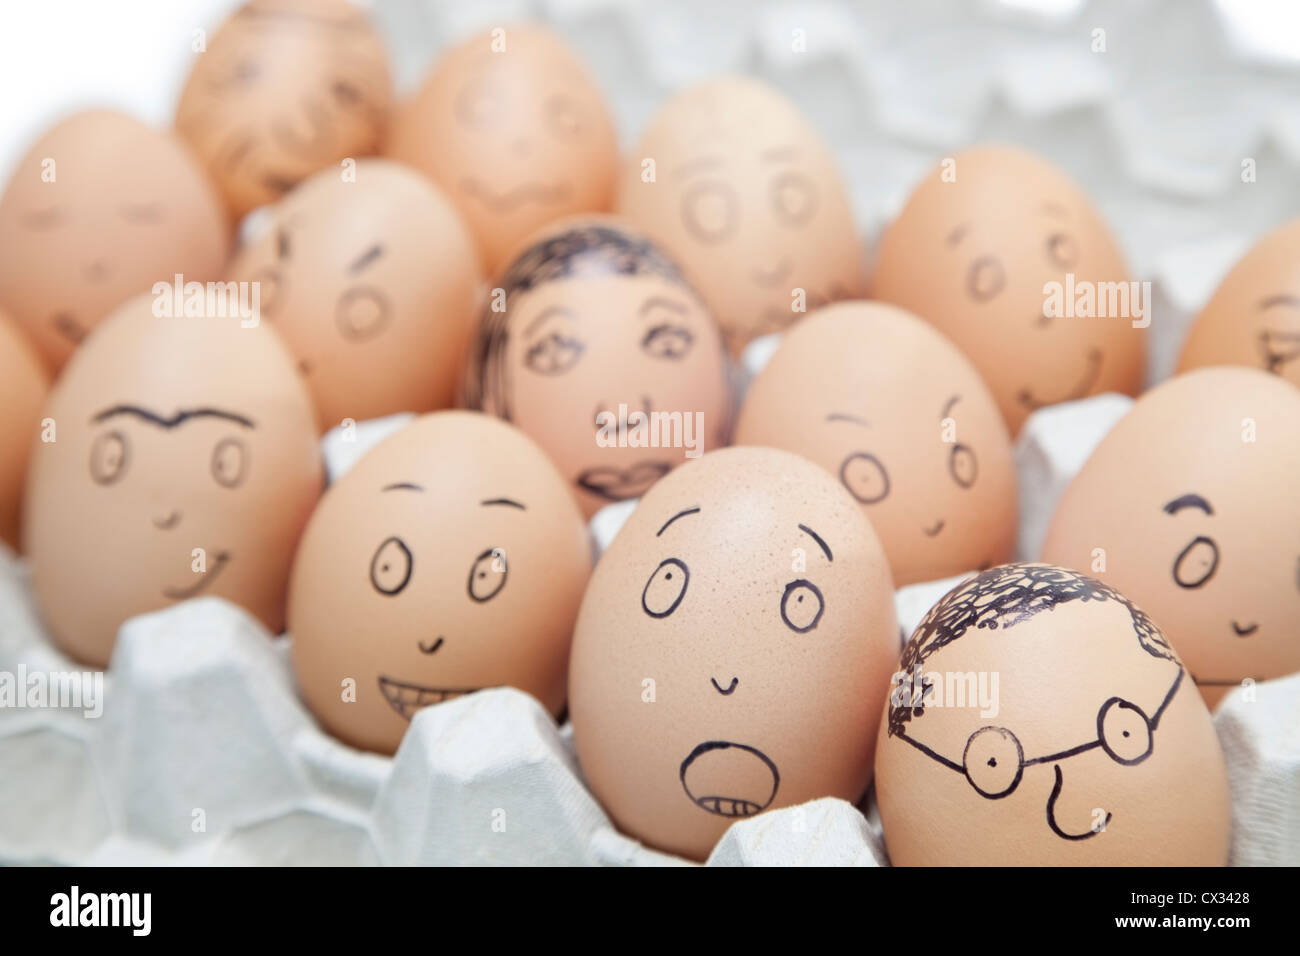 Various facial expressions painted on brown eggs in egg carton Stock Photo